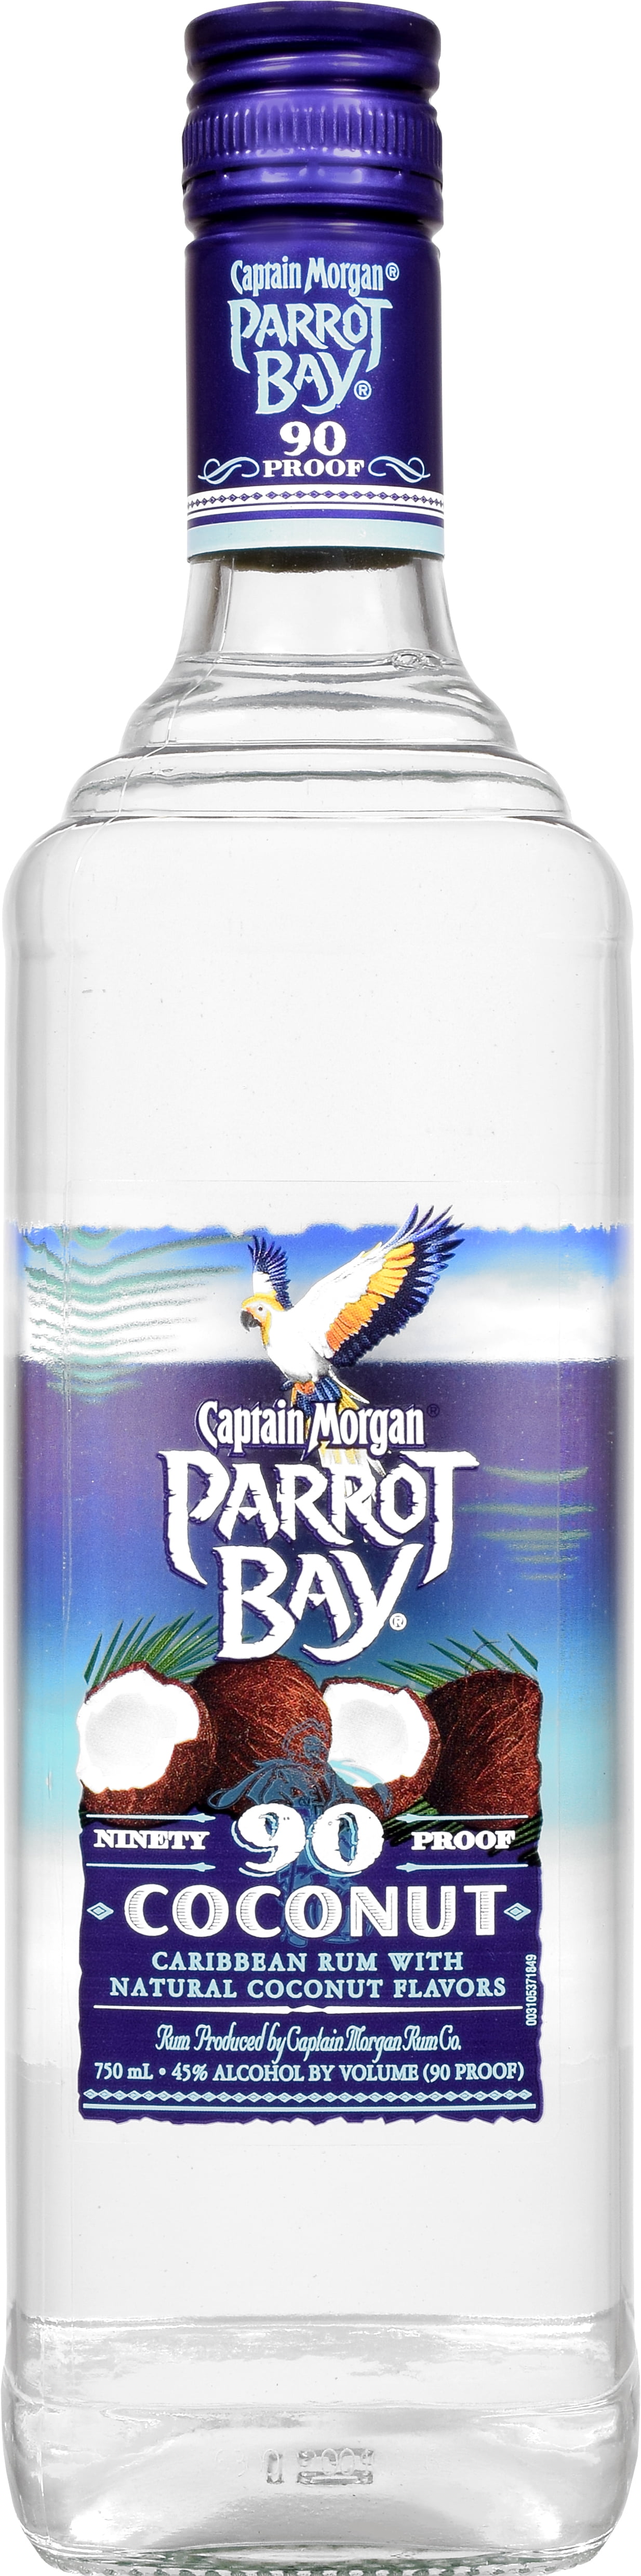 Parrot Bay Rum Bottle Fishing Lure 2 1/2 inch 